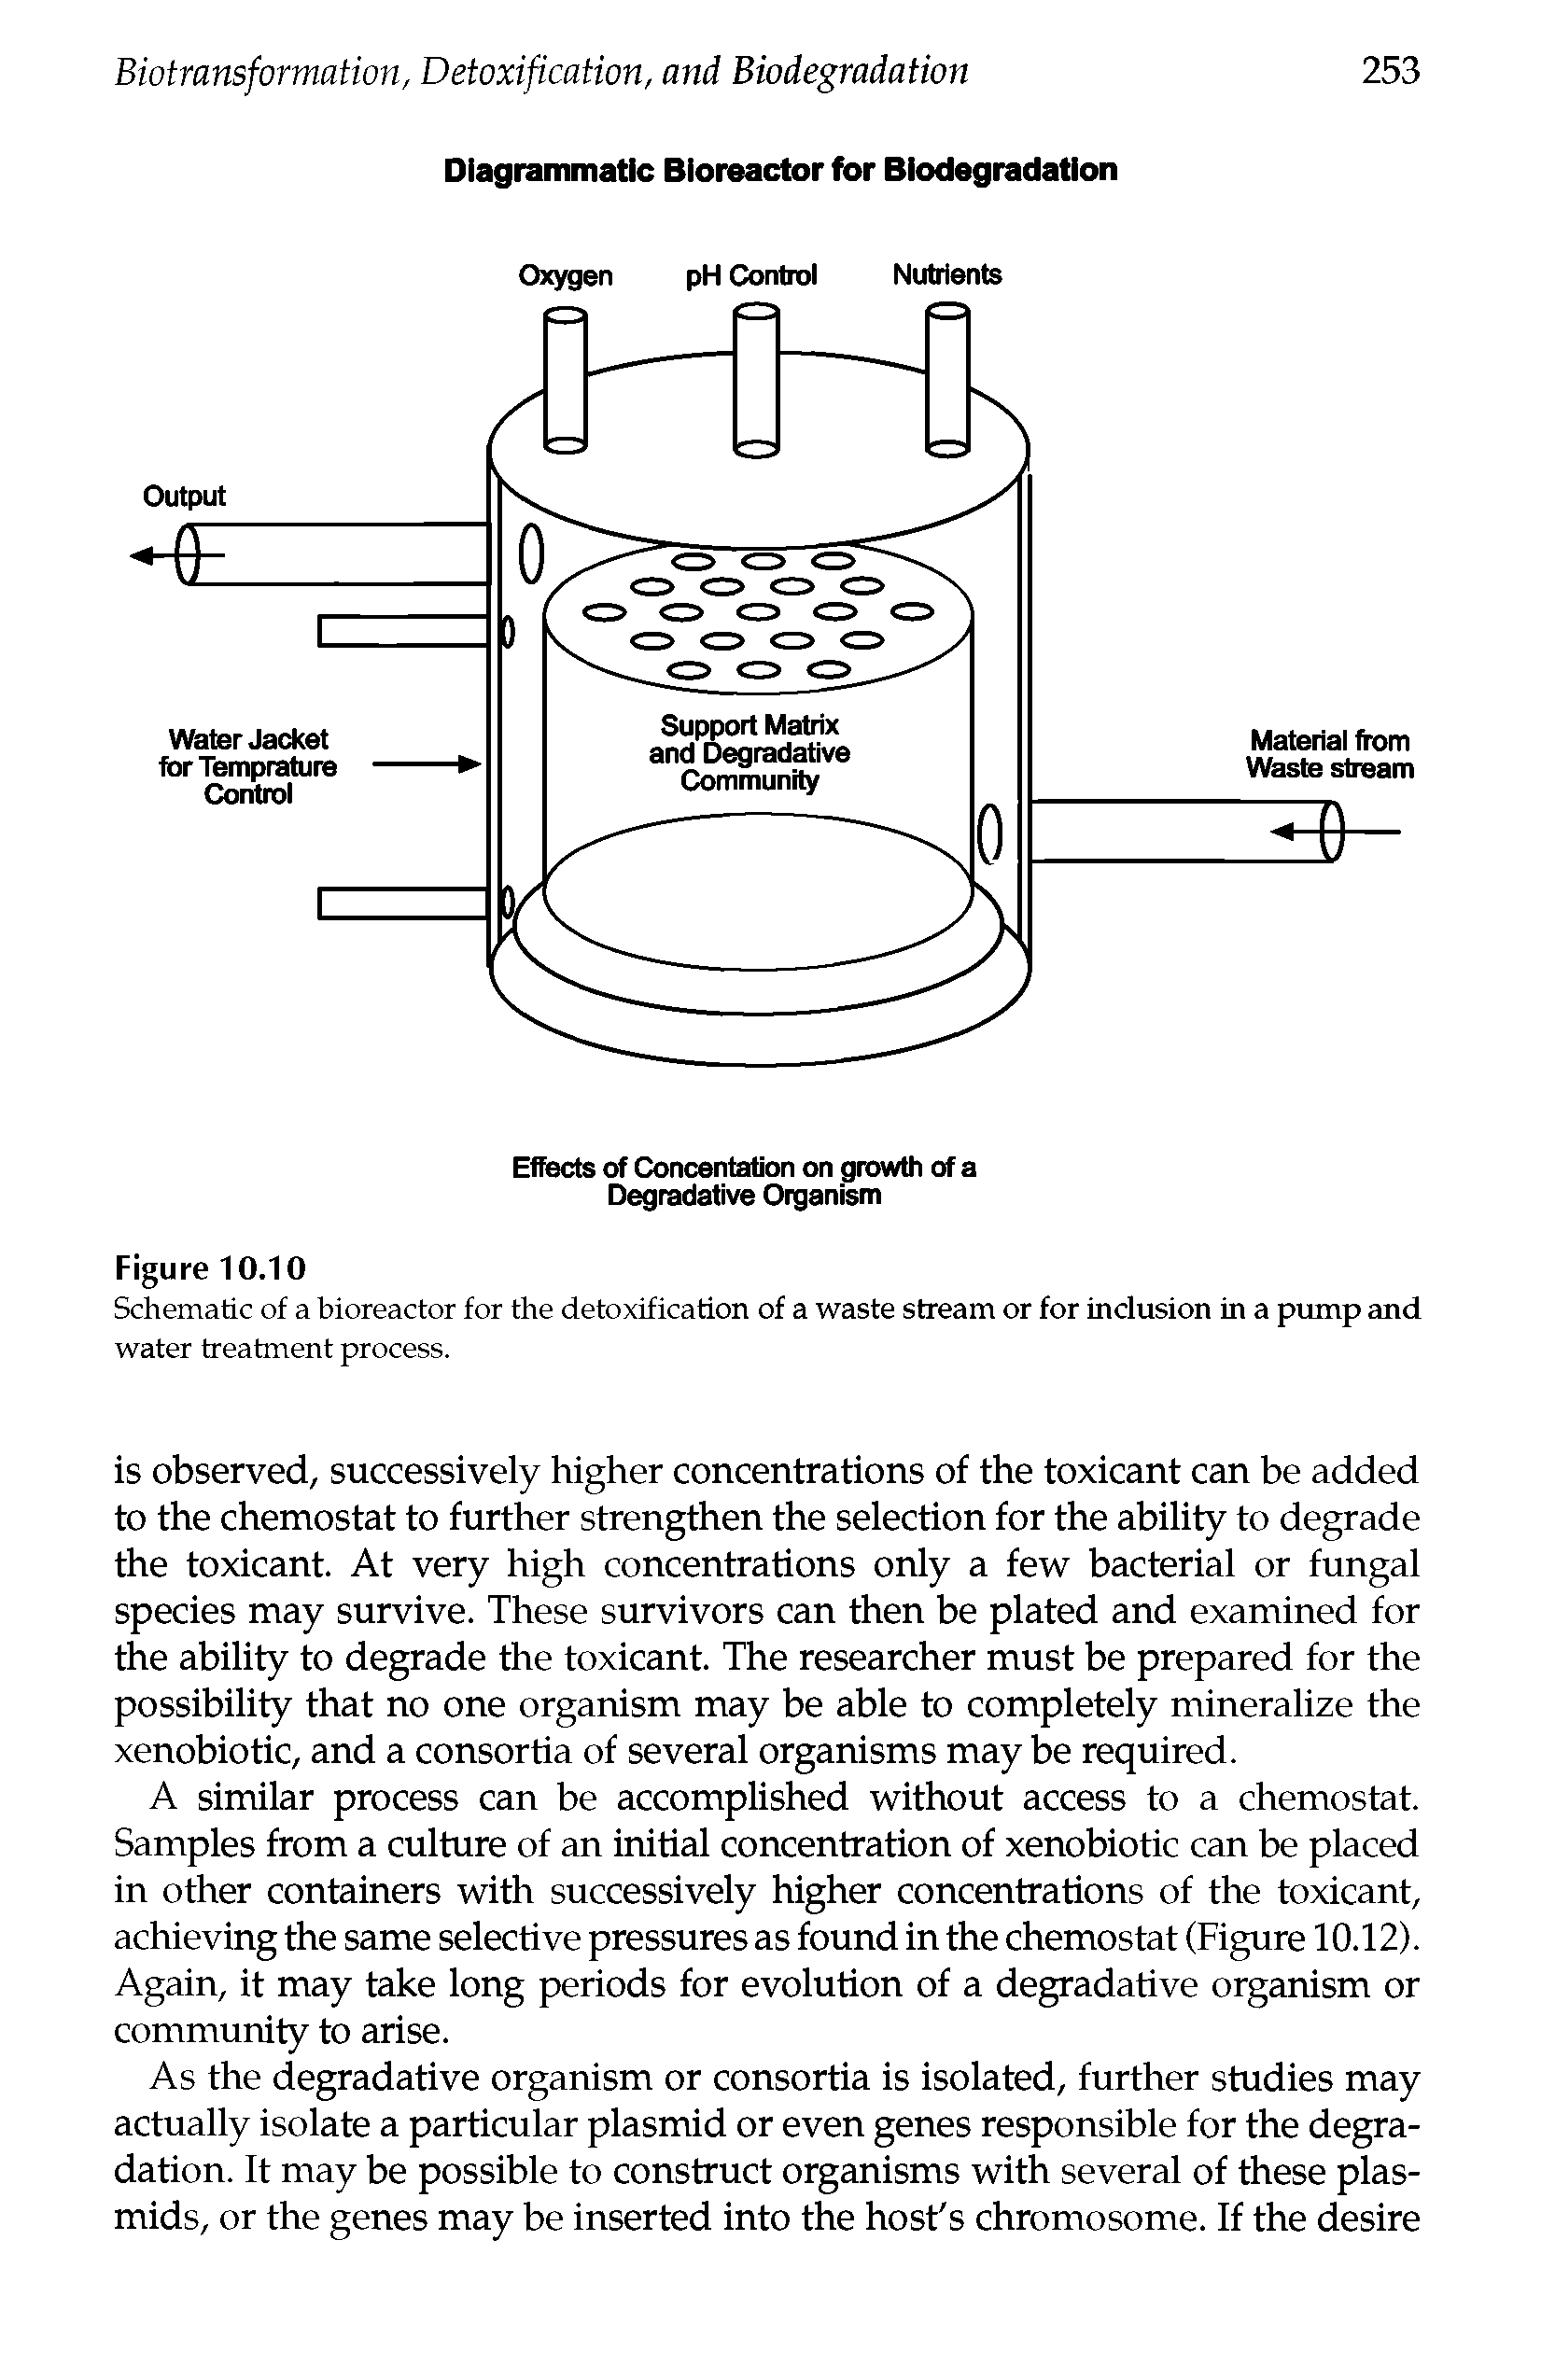 Schematic of a bioreactor for the detoxification of a waste stream or for inclusion in a pump and water treatment process.